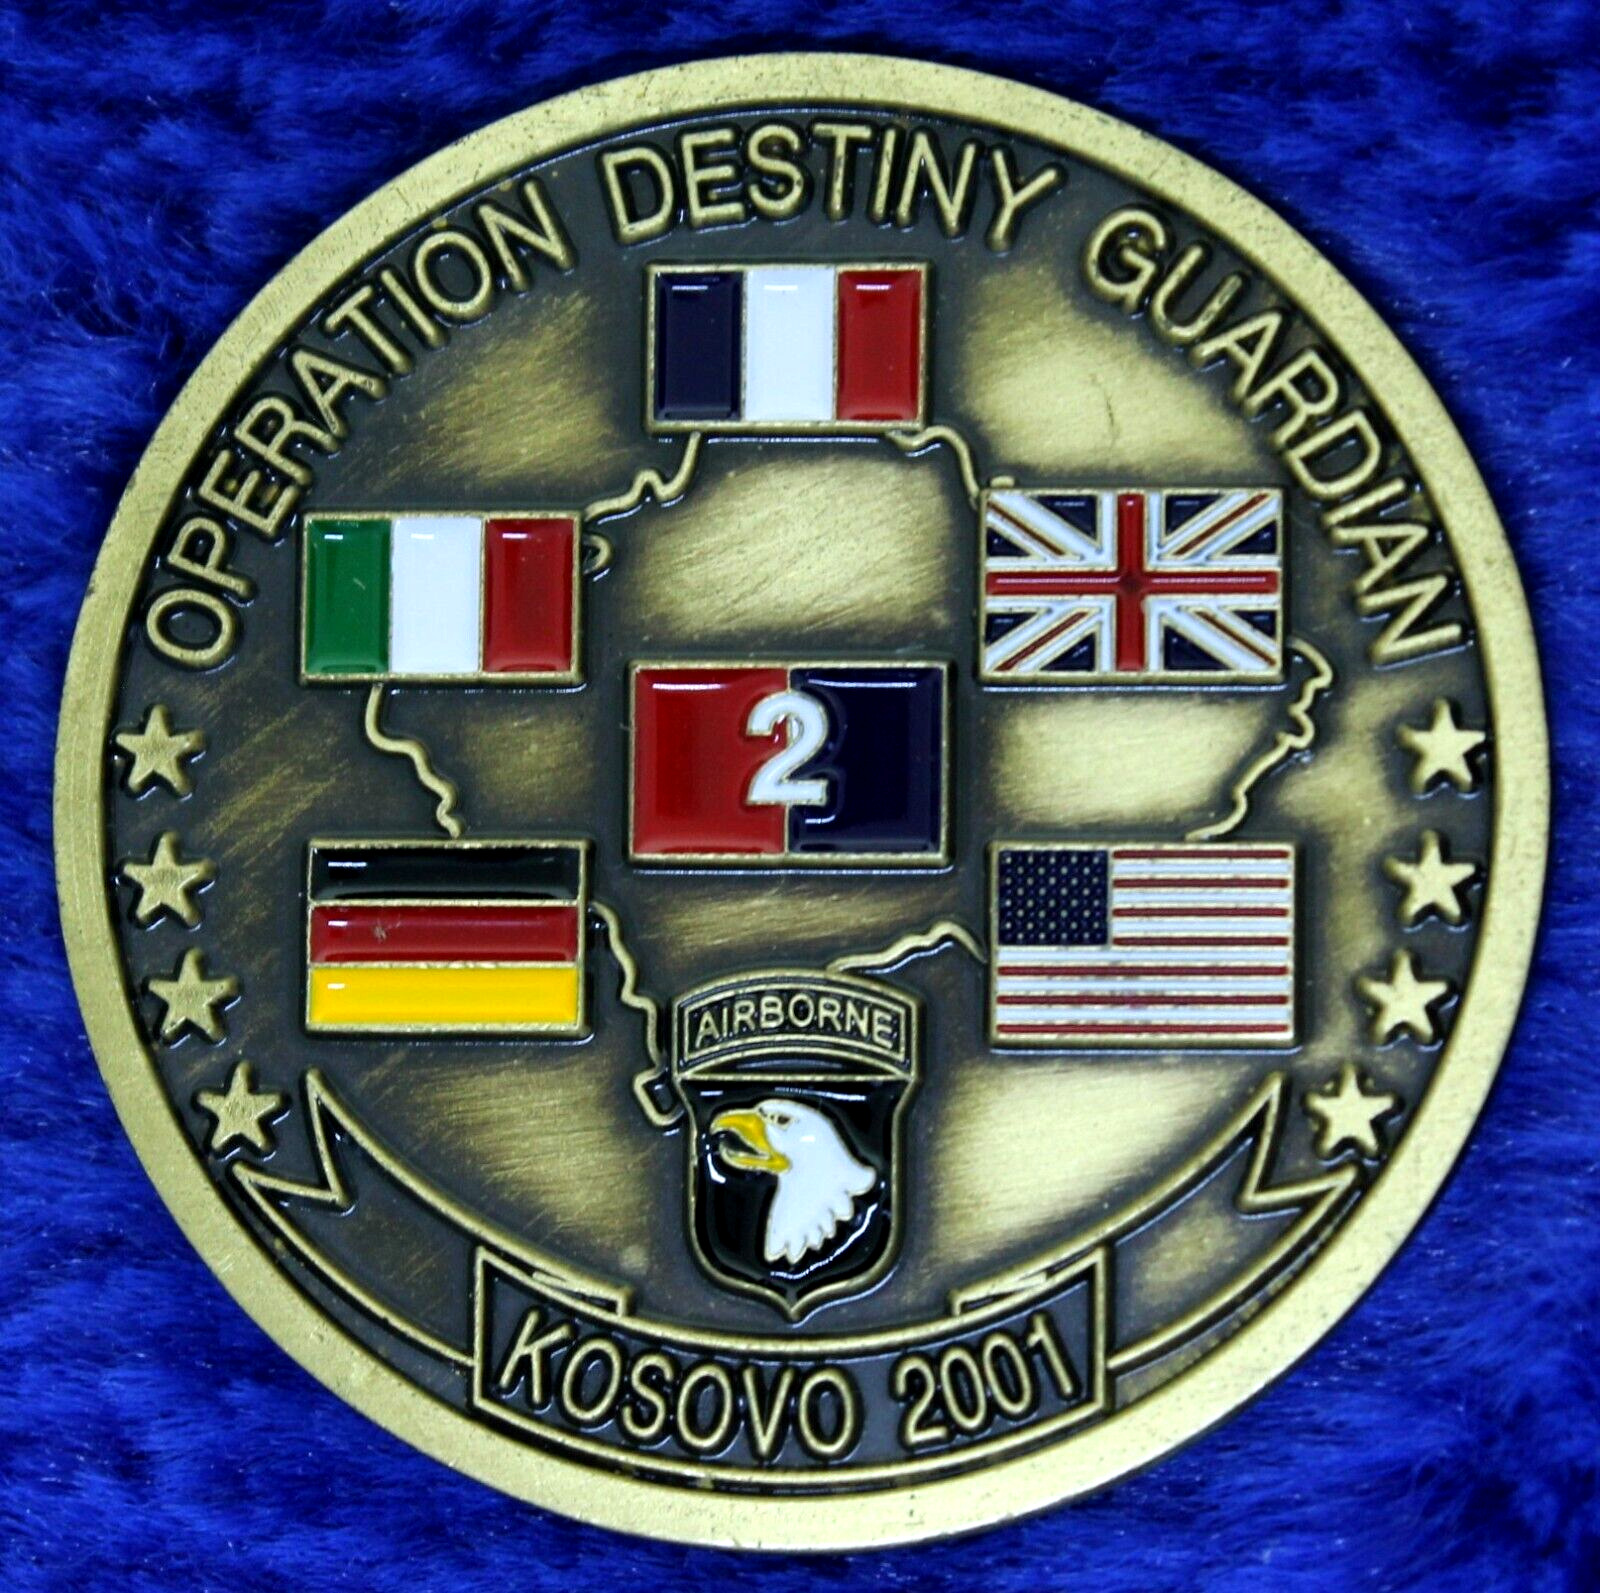 US Army Task Force Falcon Op Destiny Guardian Kosovo 2001 Challenge Coin PT-4